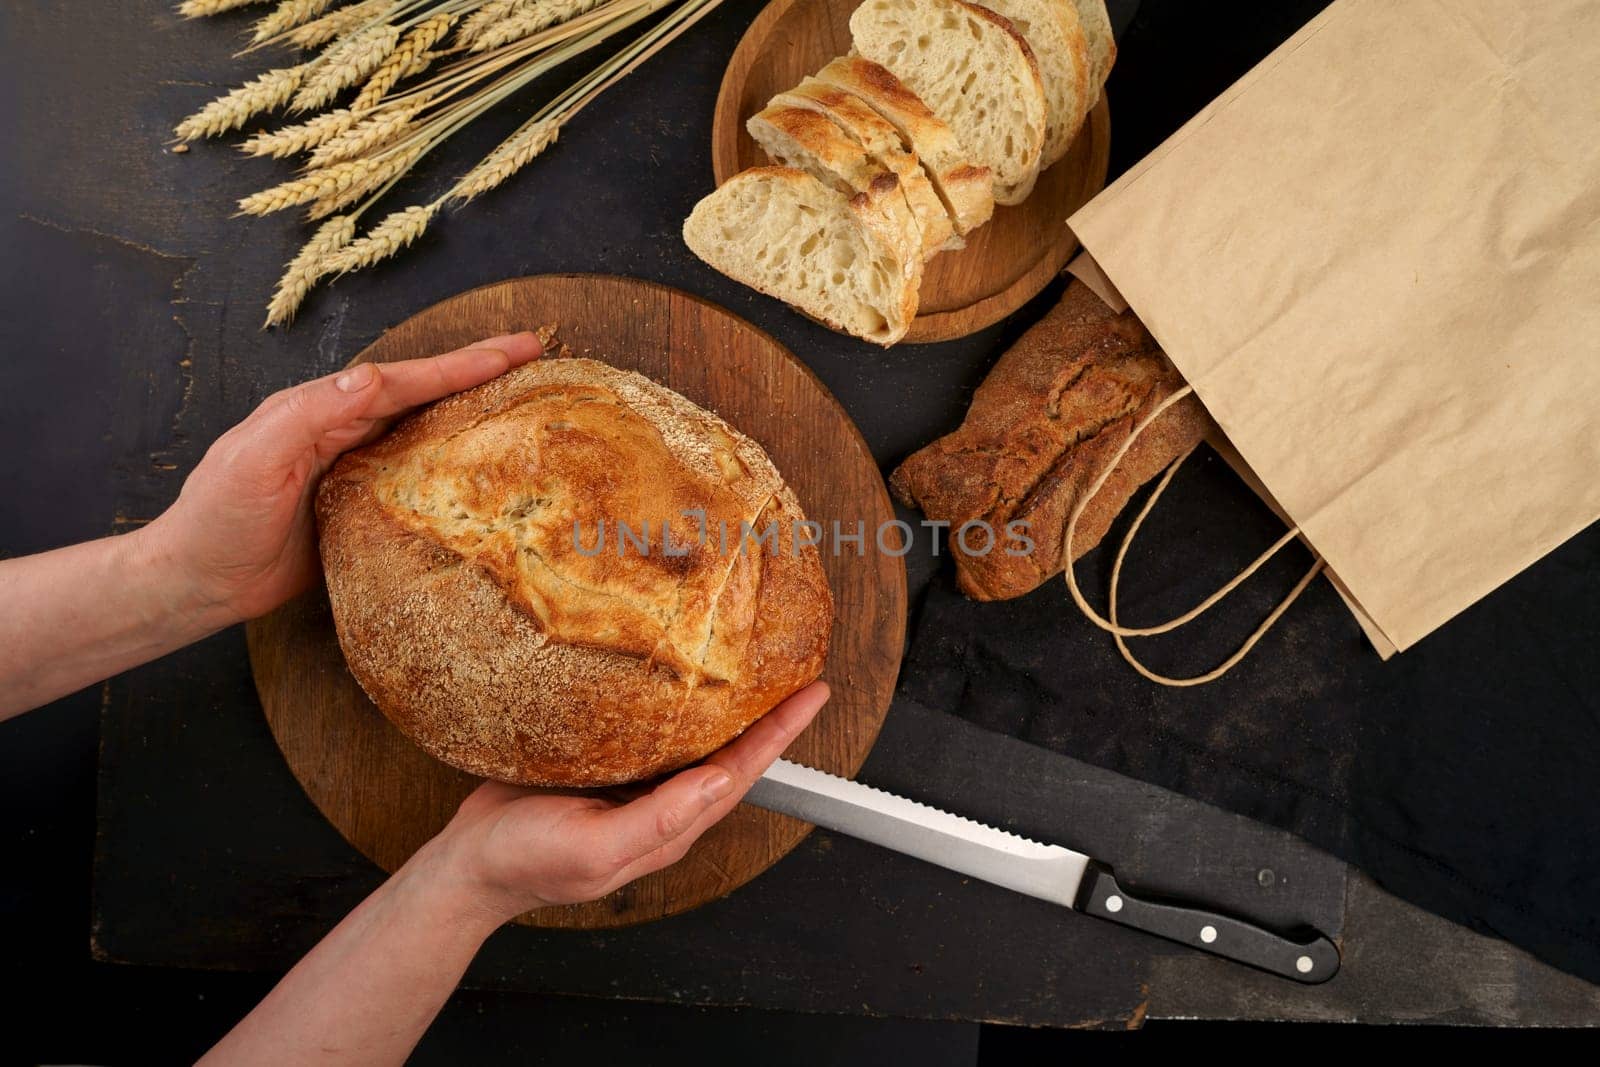 The healthy eating and traditional bakery concept. Top viev. Fresh bread on table close-up. Fresh bread on the kitchen table Whole grain bread put on kitchen wood plate with a chef near knife ready for cut. by aprilphoto